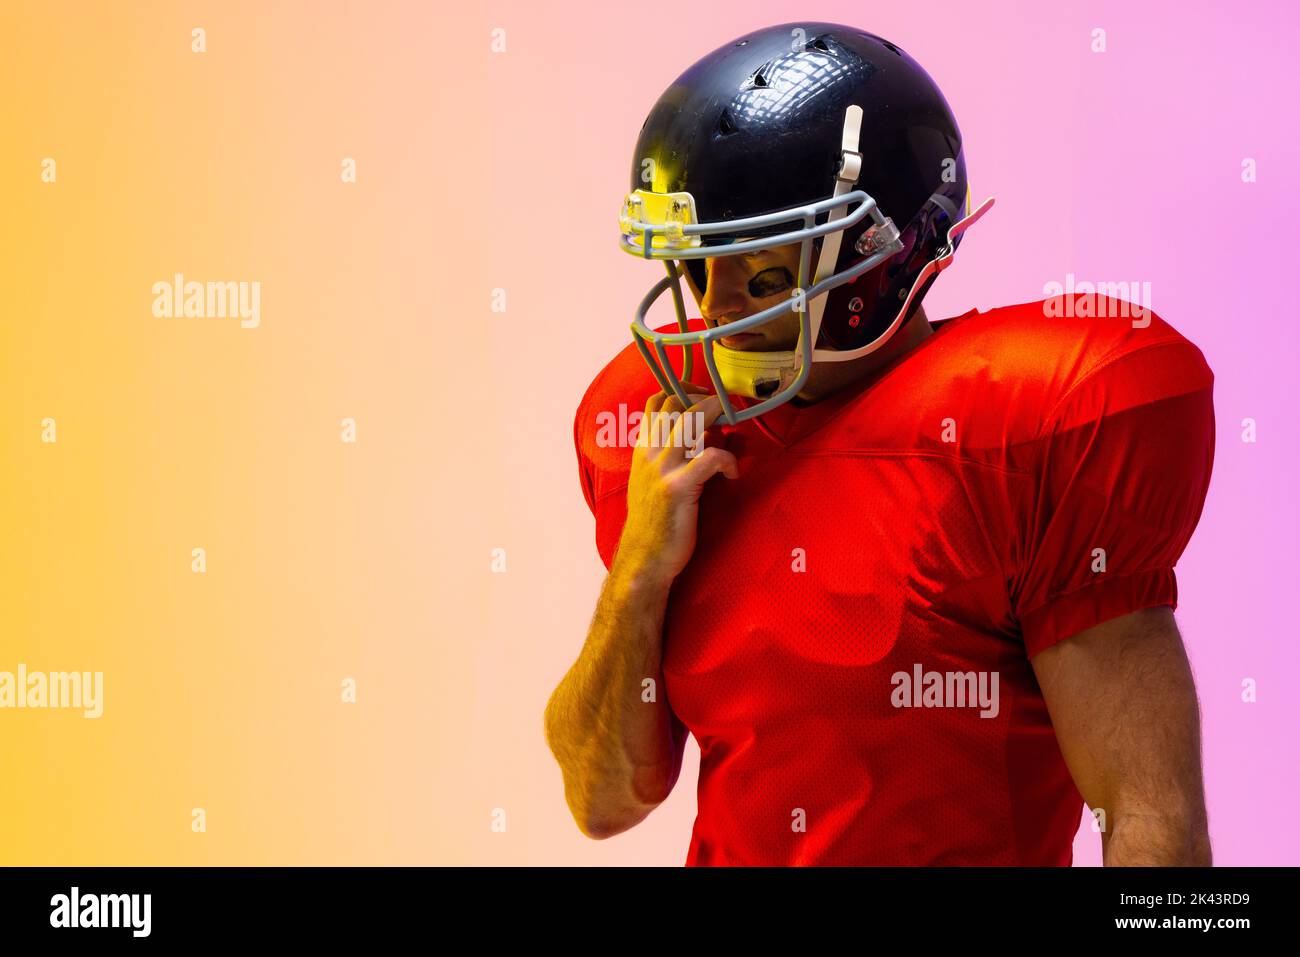 Caucasian male american football player wearing helmet with neon yellow and purple lighting. Sport, movement, training and active lifestyle concept. Stock Photo